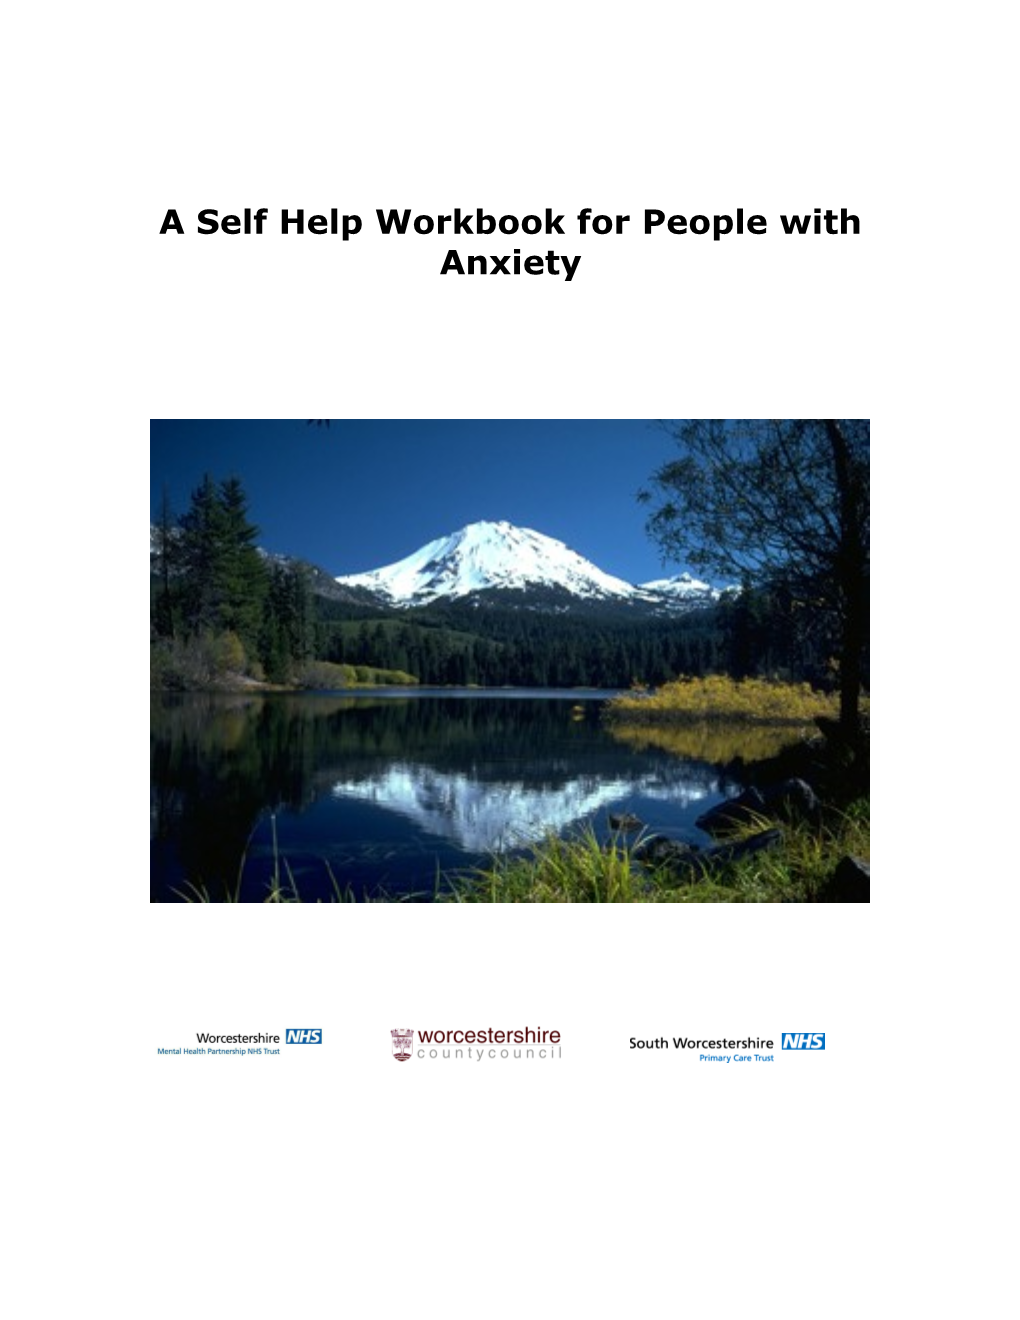 A Self Help Workbook for People with Anxiety